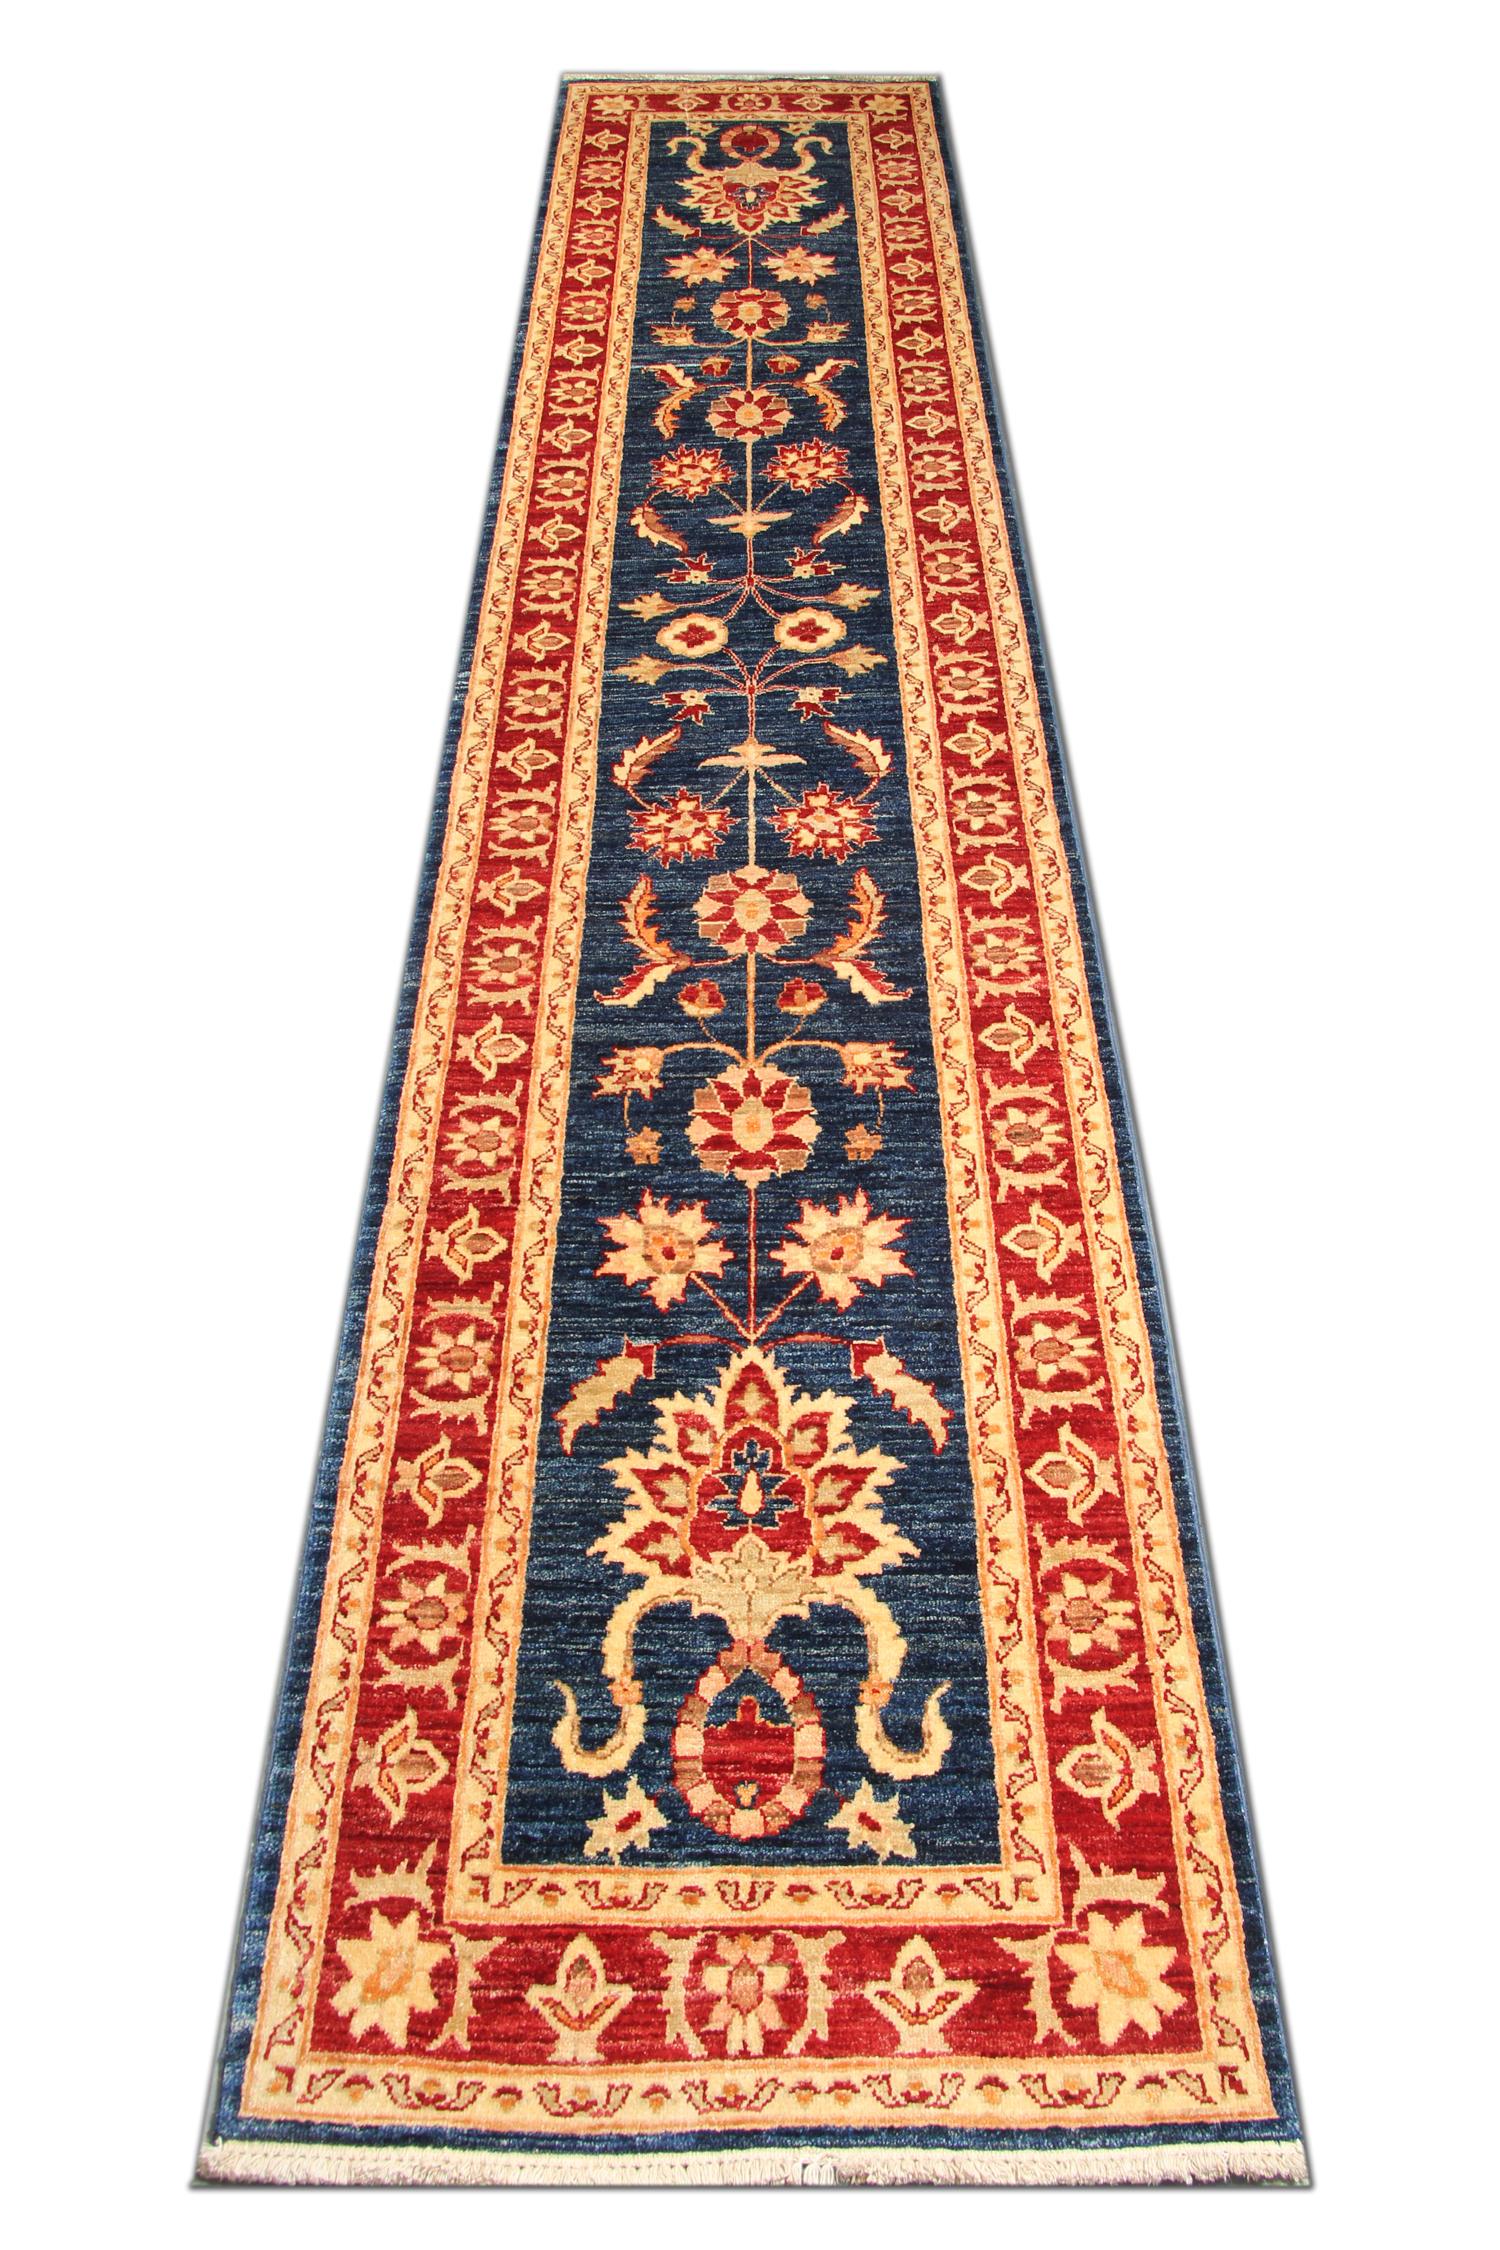 This modern Ziegler runner rug features a traditional Saltanabad design. Woven on looms in Afghanistan by master weavers. Constructed with the finest hand-spun wool, which has been dyed using traditional organic vegetable dying techniques.
The